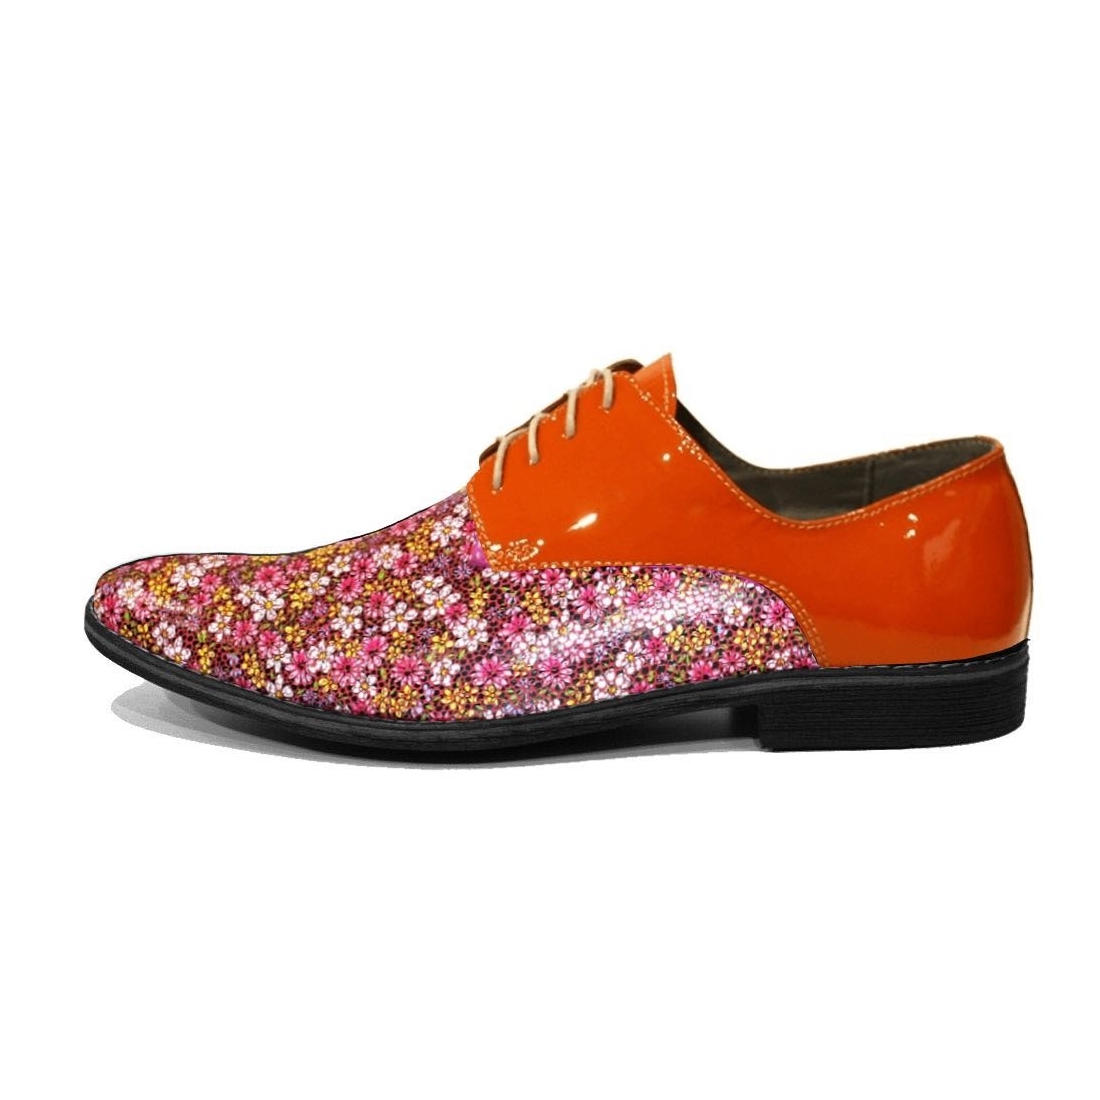 copy of Modello Fiolle - Chaussure Classique - Handmade Colorful Italian Leather Shoes